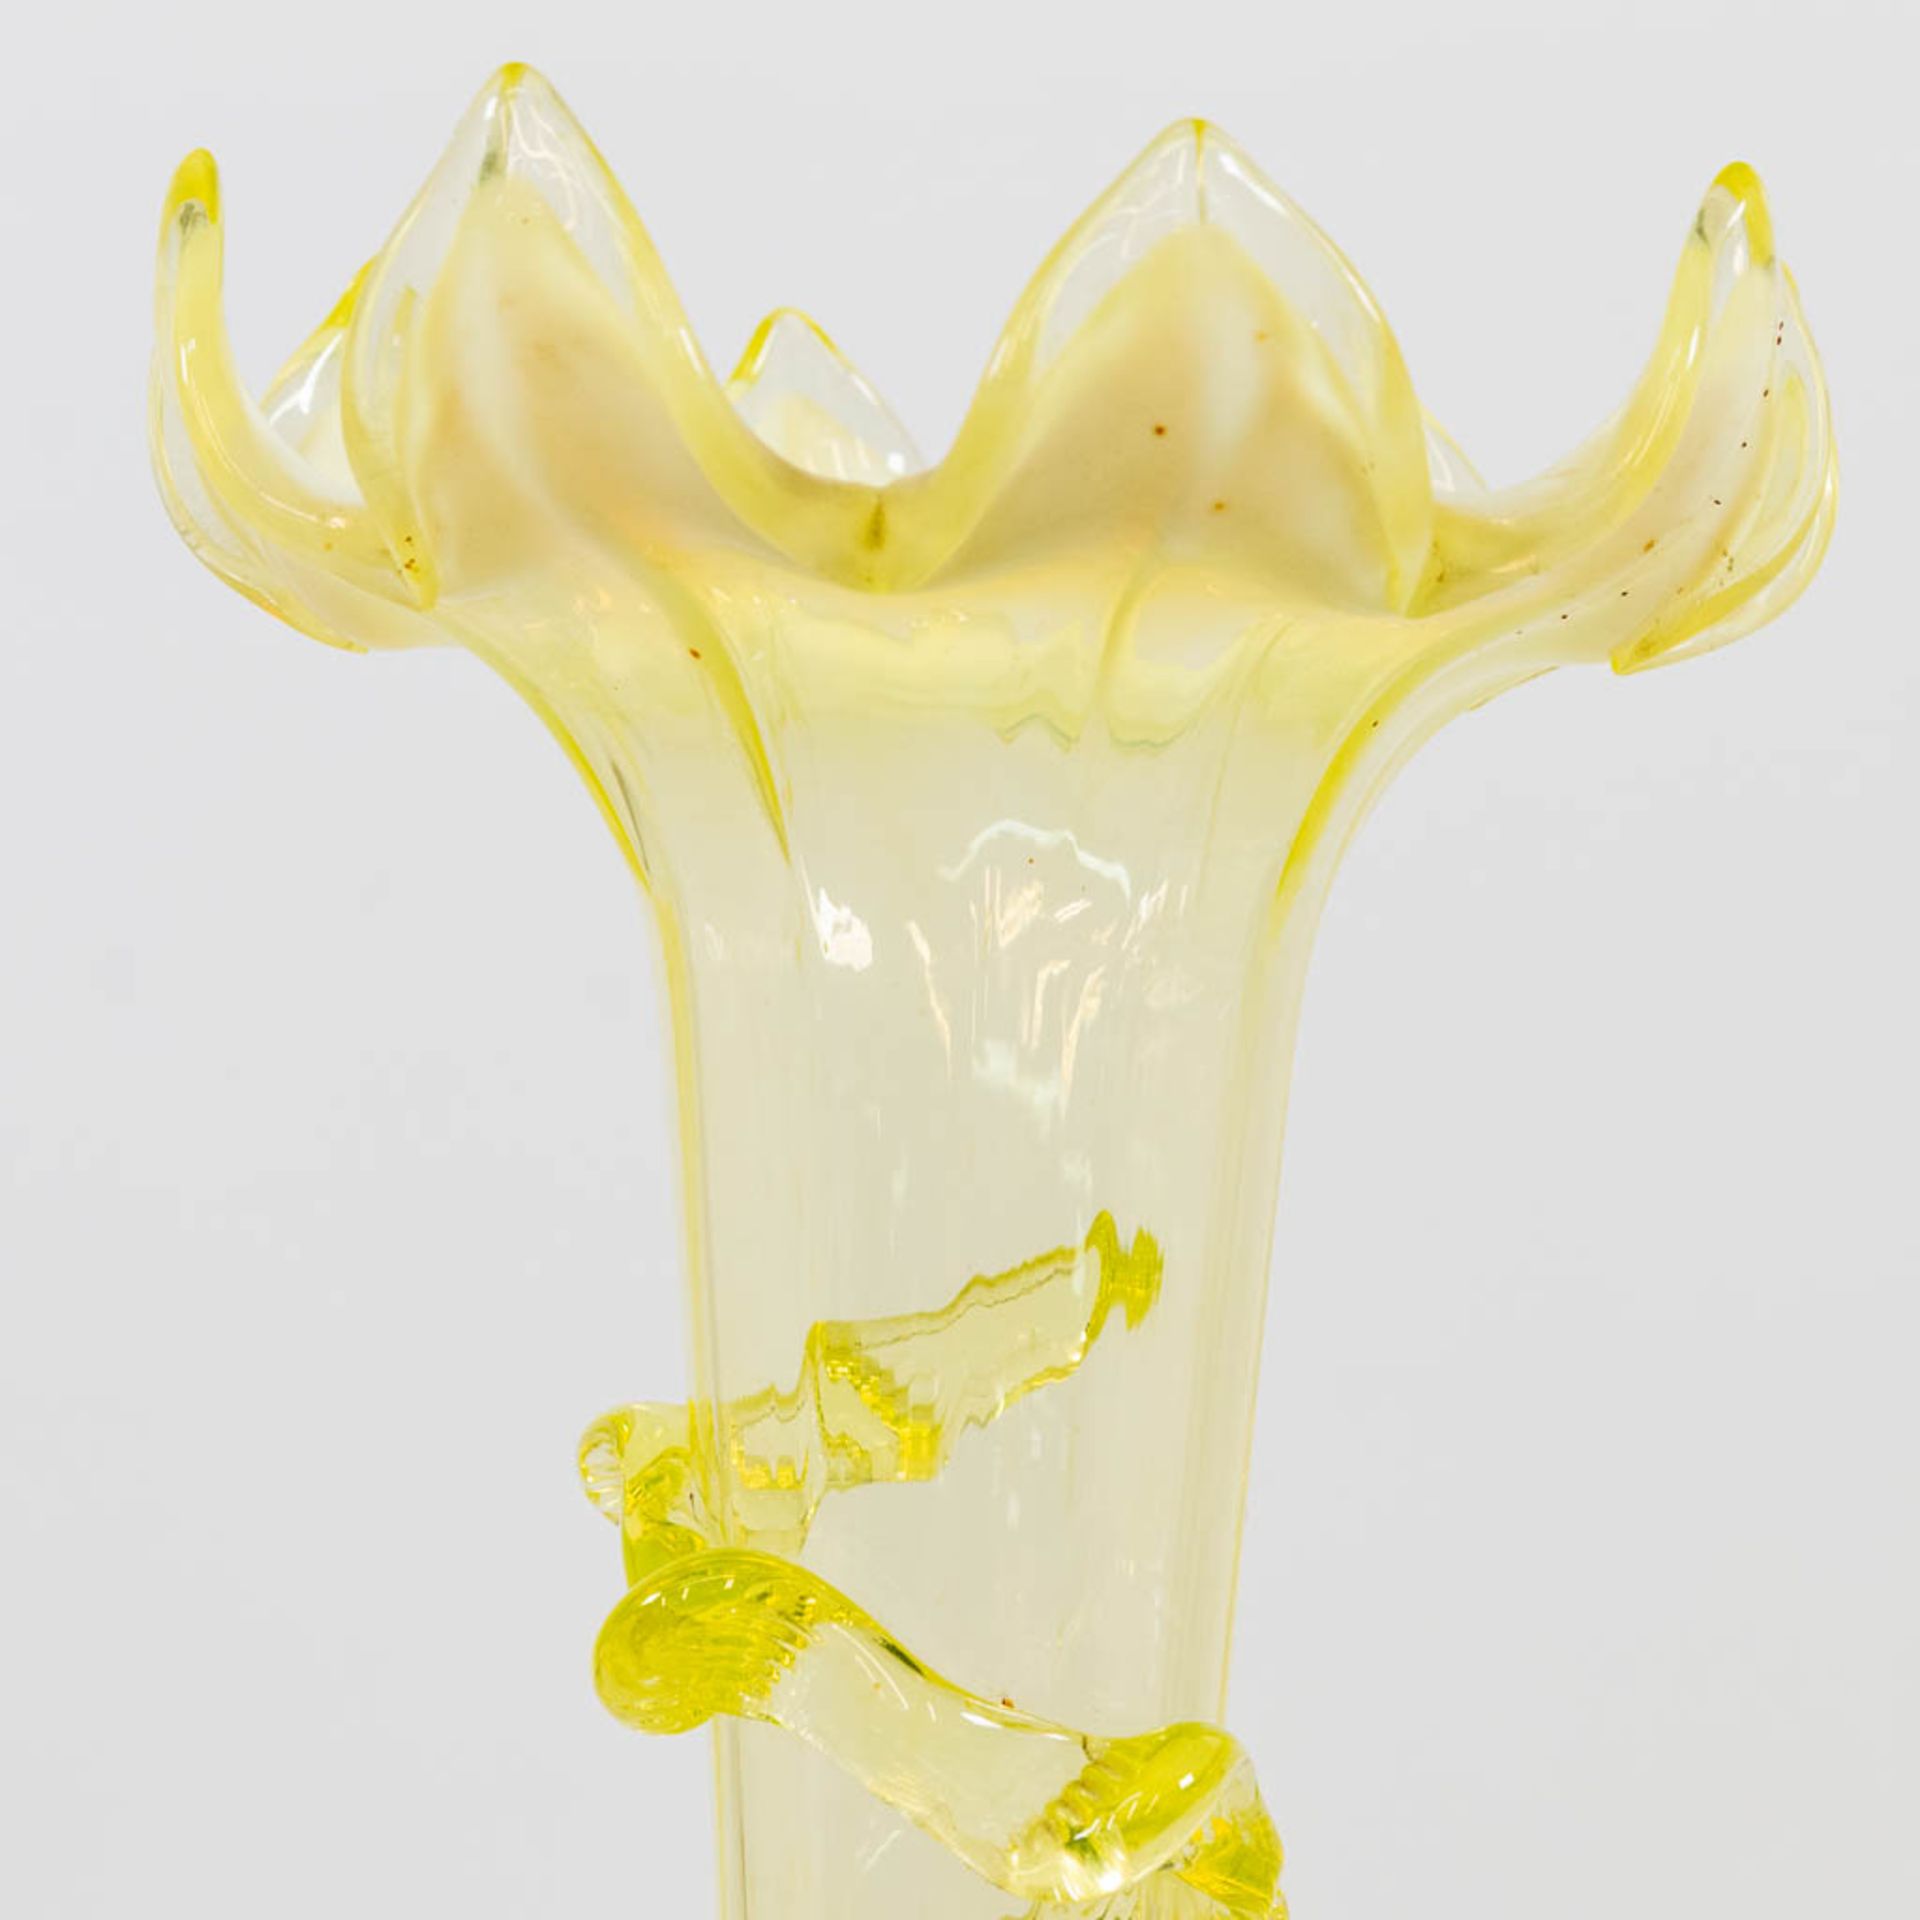 A yellow and clear glass table centrepiece pic-fleur, made in Murano, Italy. (25 x 28 x 45 cm) - Bild 9 aus 15